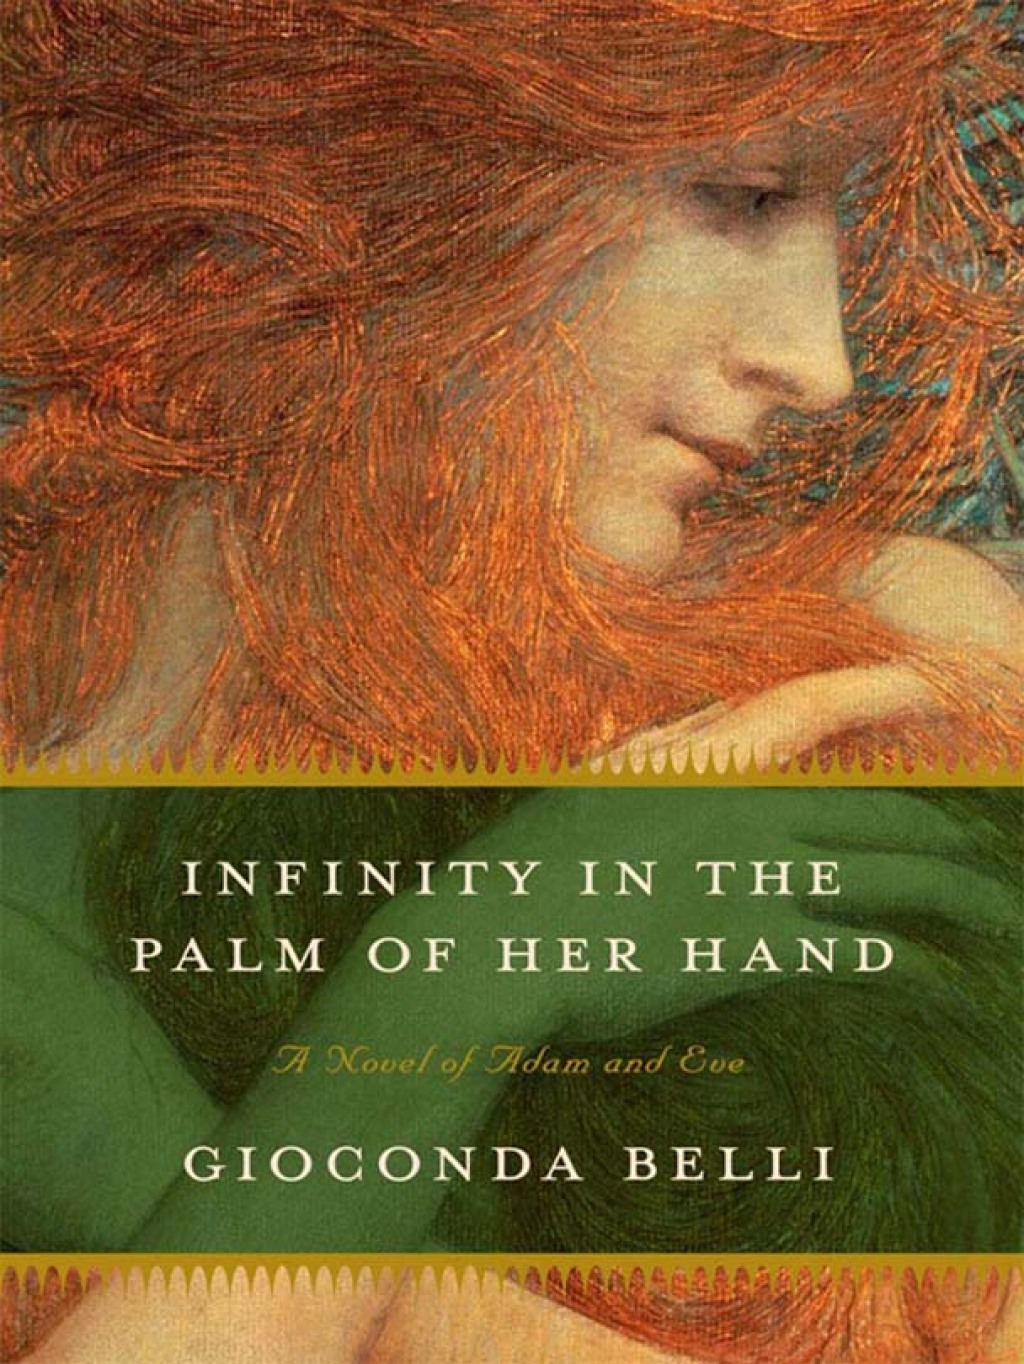 Infinity in the Palm of Her Hand (eBook) - Gioconda Belli,